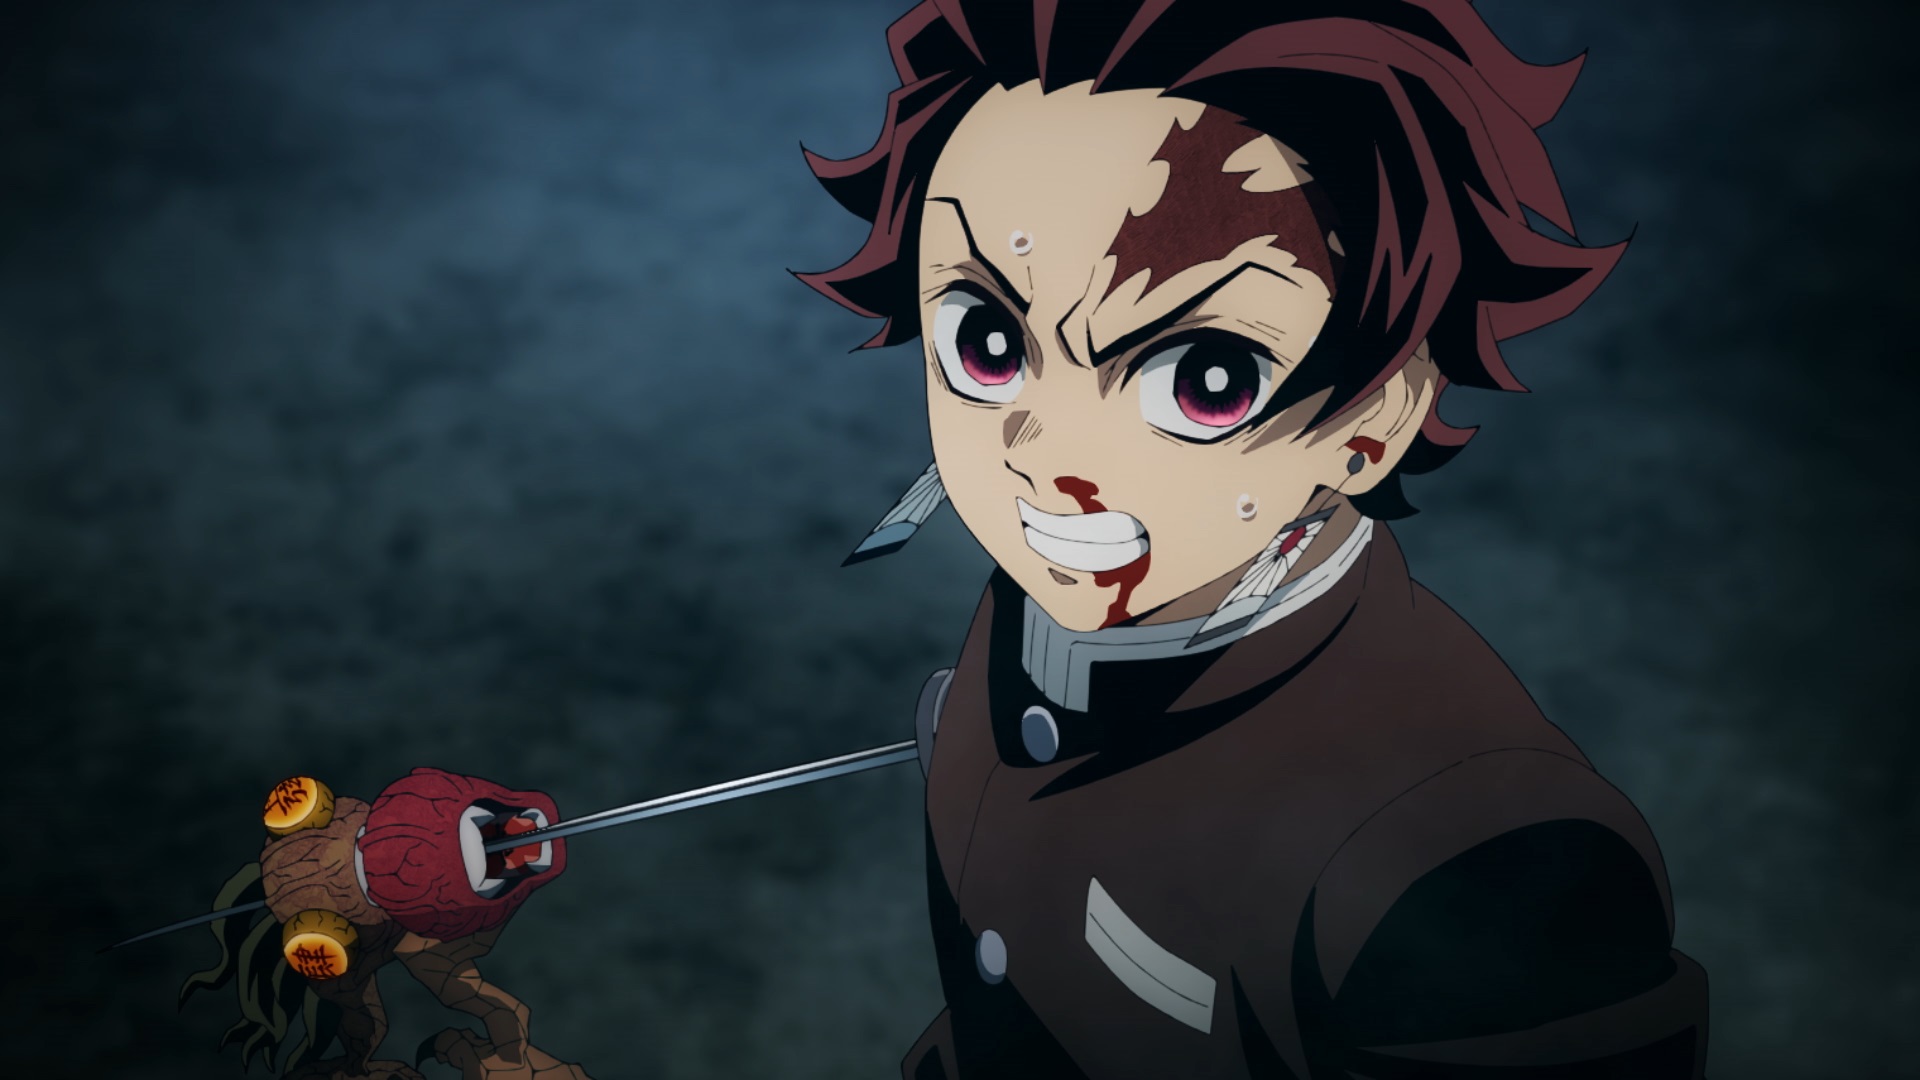 Demon Slayer: Kimetsu no Yaiba (English) on X: Just one more night until a  new episode of Demon Slayer: Kimetsu no Yaiba Swordsmith Village Arc starts  streaming on @Crunchyroll! Who's ready? 🙋‍♀️